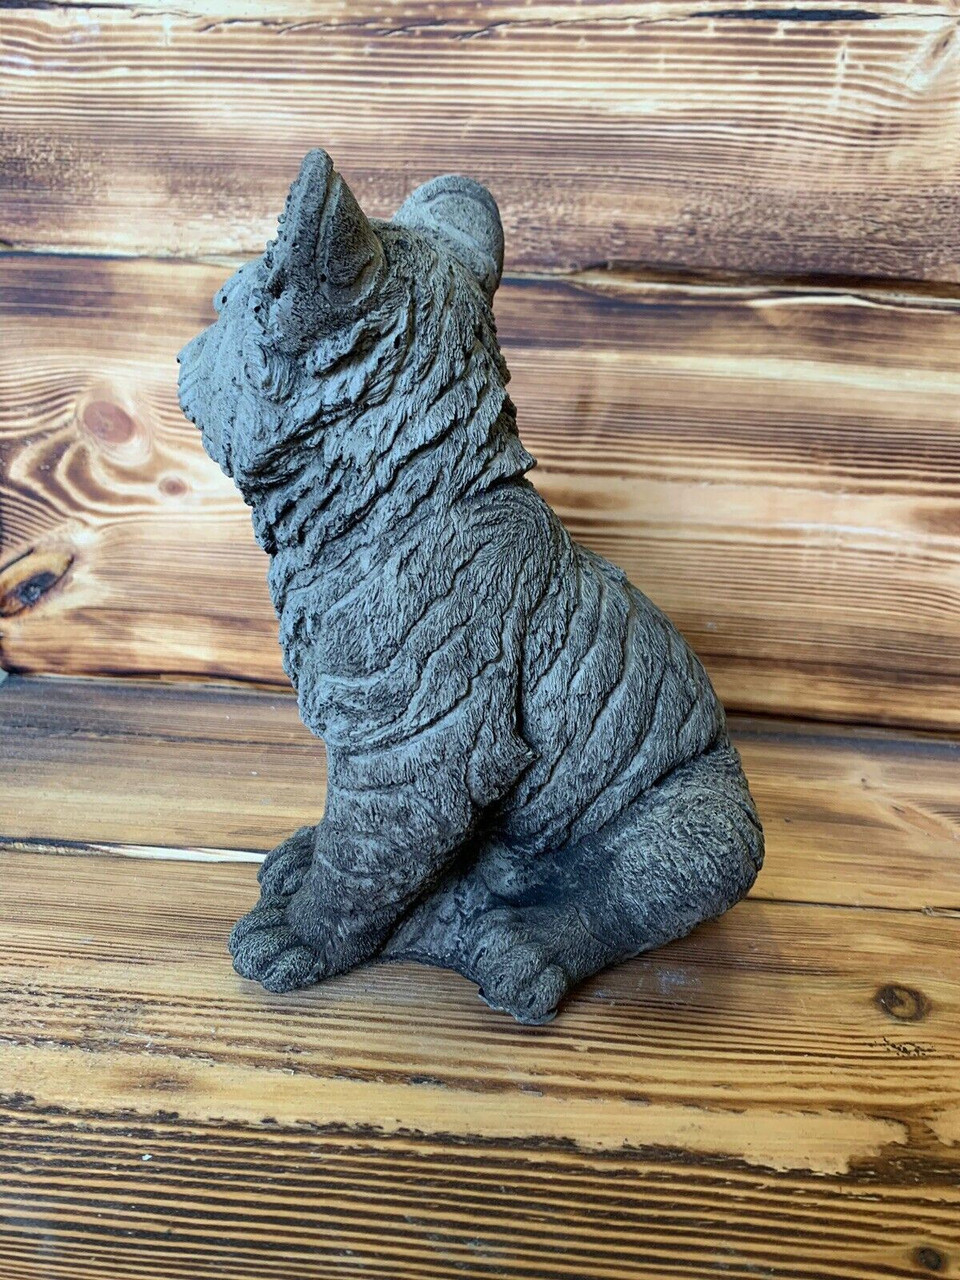 STONE GARDEN DETAILED CUTE SITTING TIGER CUB STATUE ORNAMENT  GIFT CAT